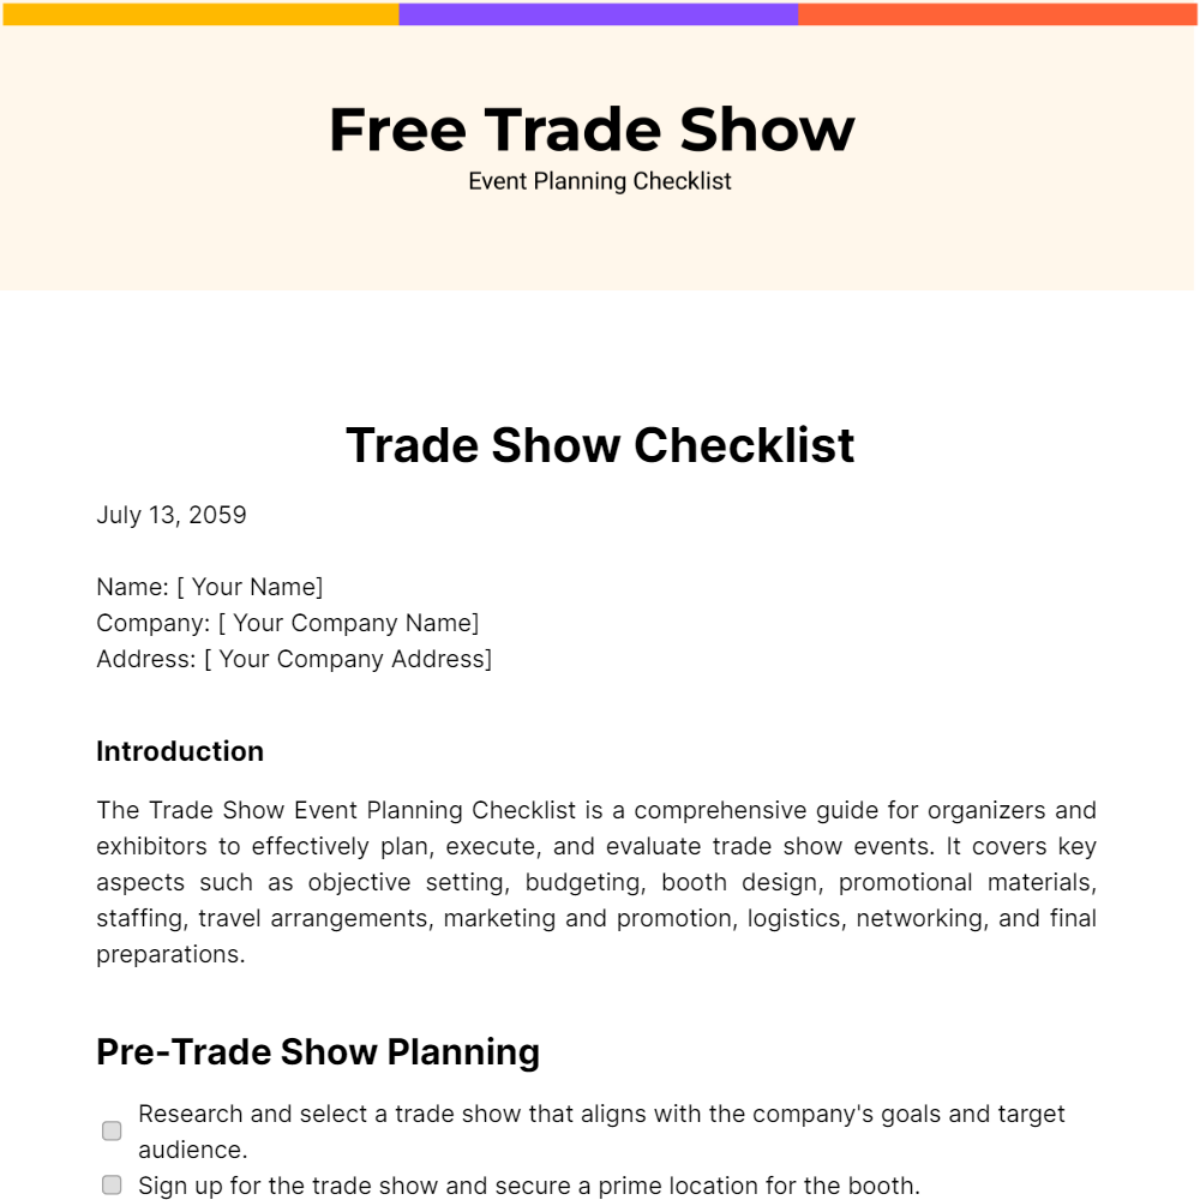 Free Trade Show Event Planning Checklist Template